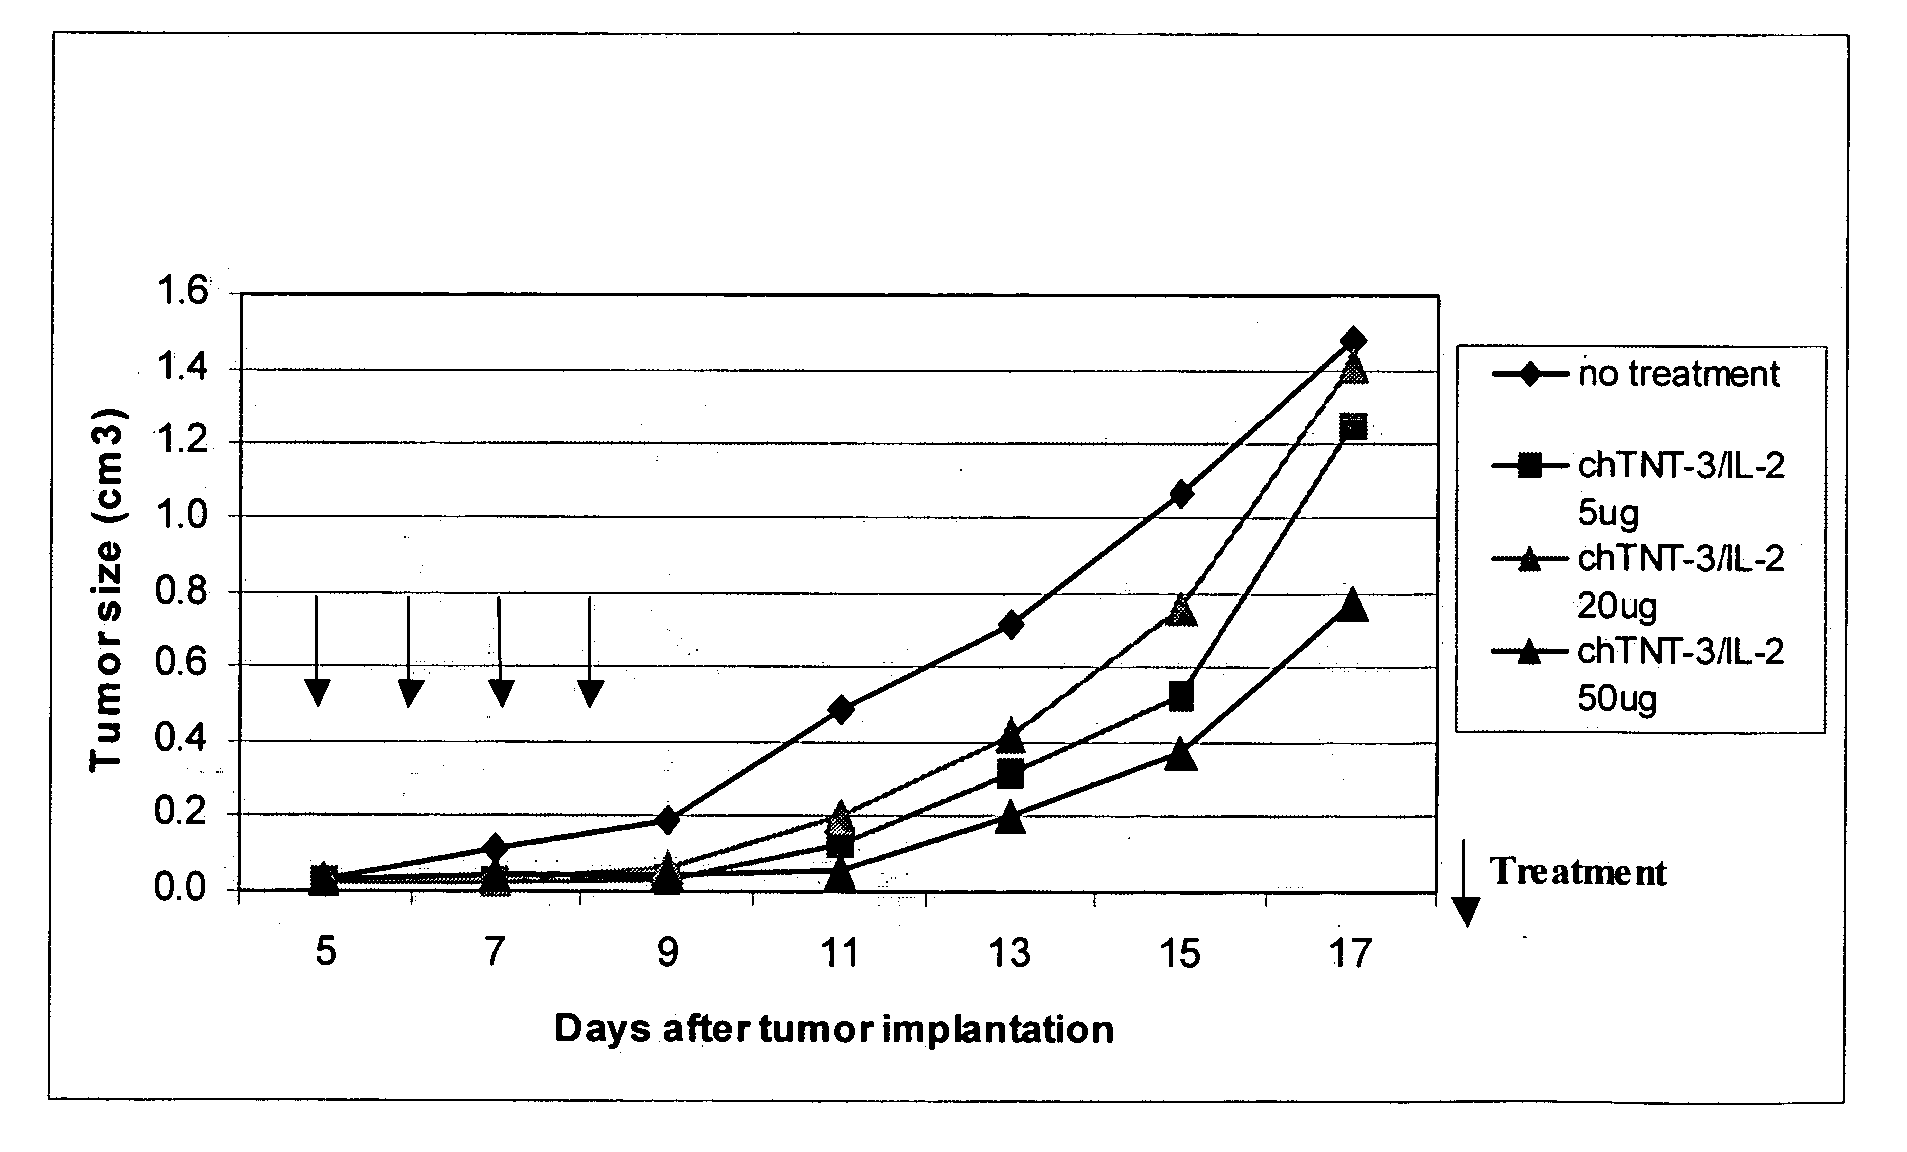 Interleukin-2 mutants with reduced toxicity